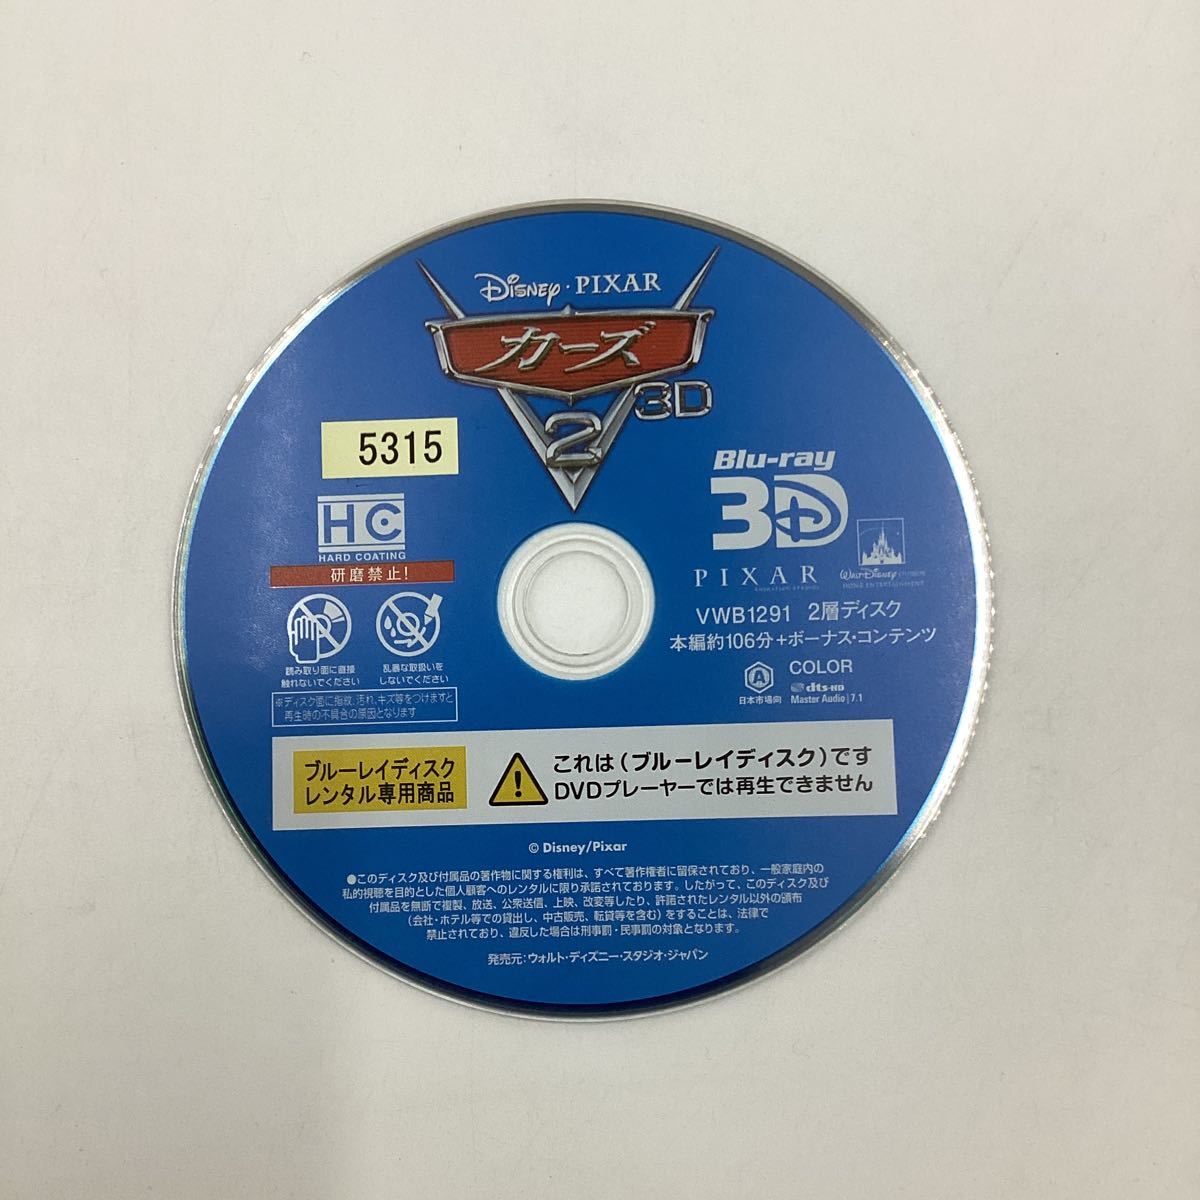 TF The Cars 2 3D *Blu-ray 3D* secondhand goods * rental 